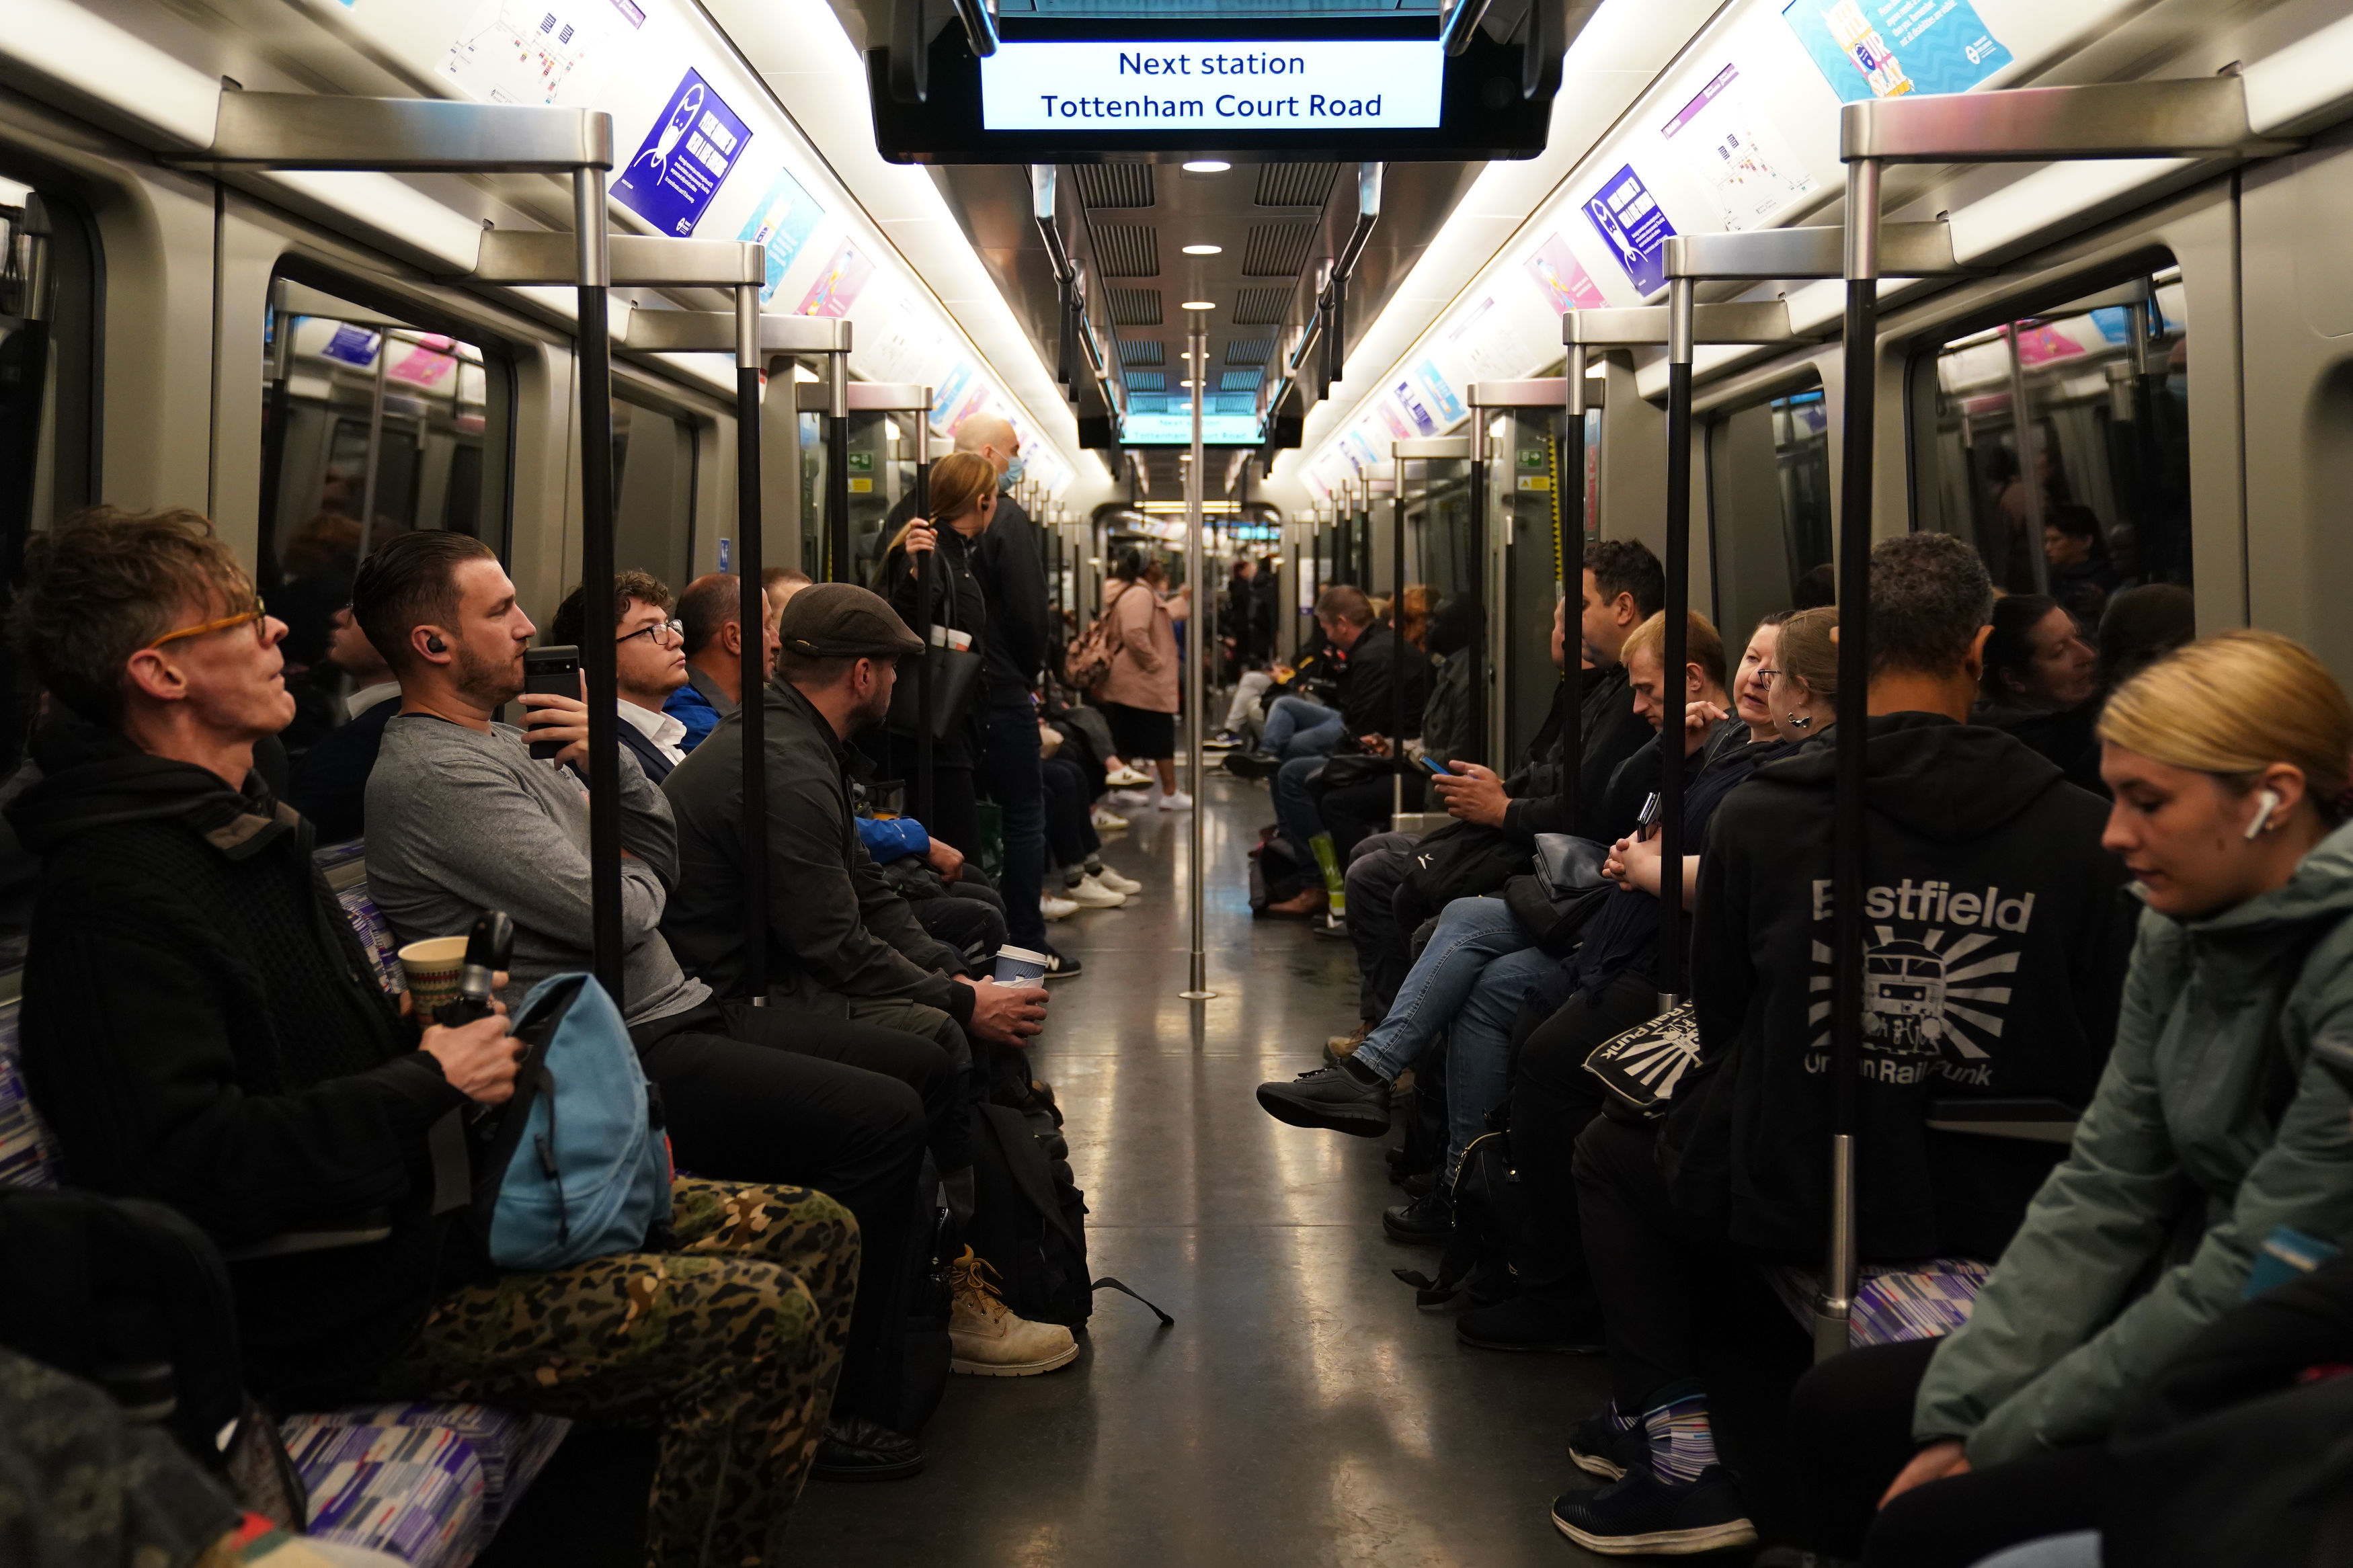 File image of passengers sitting in an Elizabeth line carriage as it approaches Tottenham Court Road station